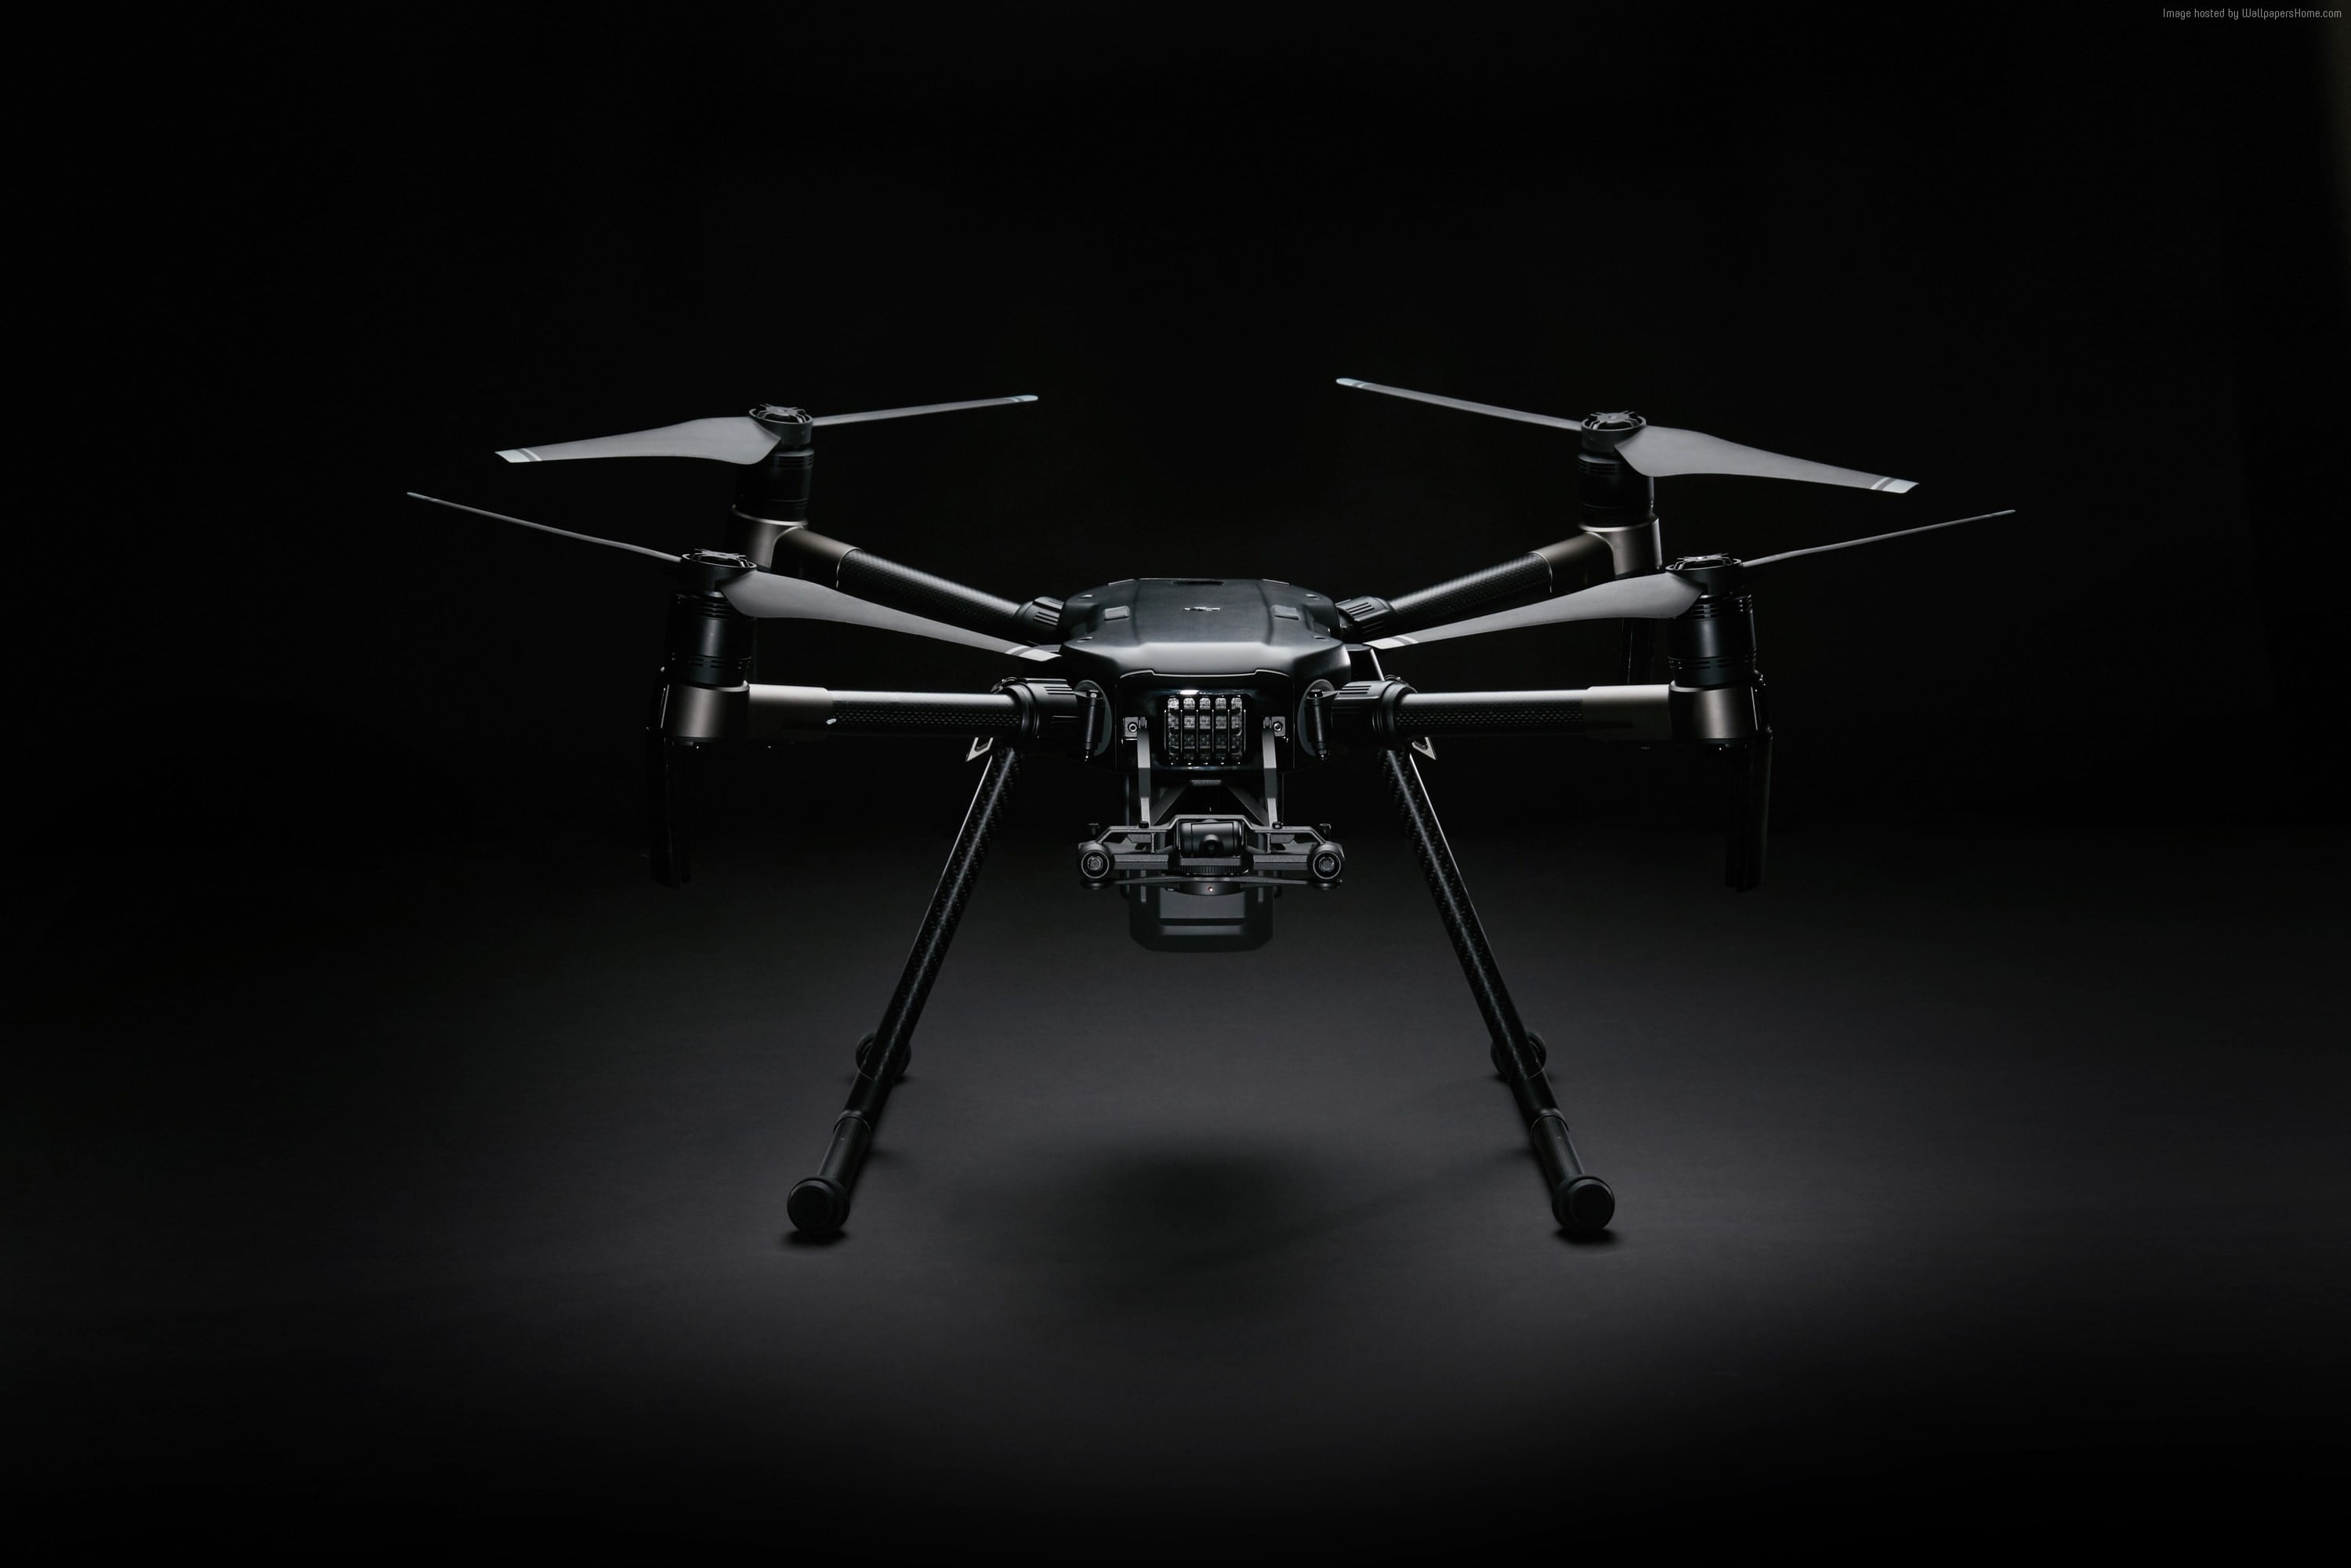 Drone: Black quadcopter in the sky, An aircraft guided by remote control, Multicopter. 3000x2010 HD Wallpaper.